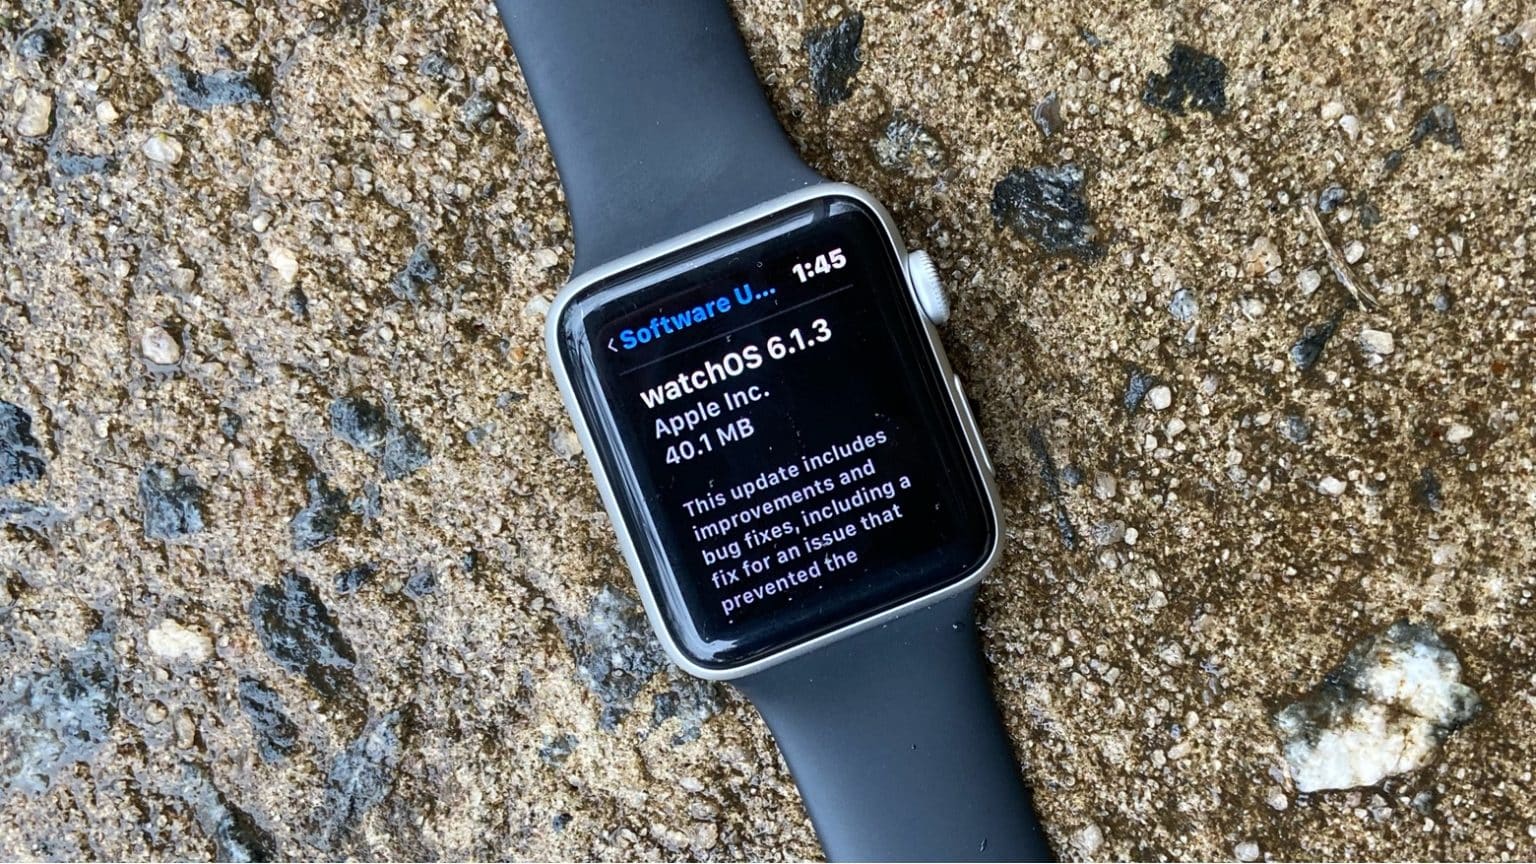 watchOS 6.1.3 update is available now